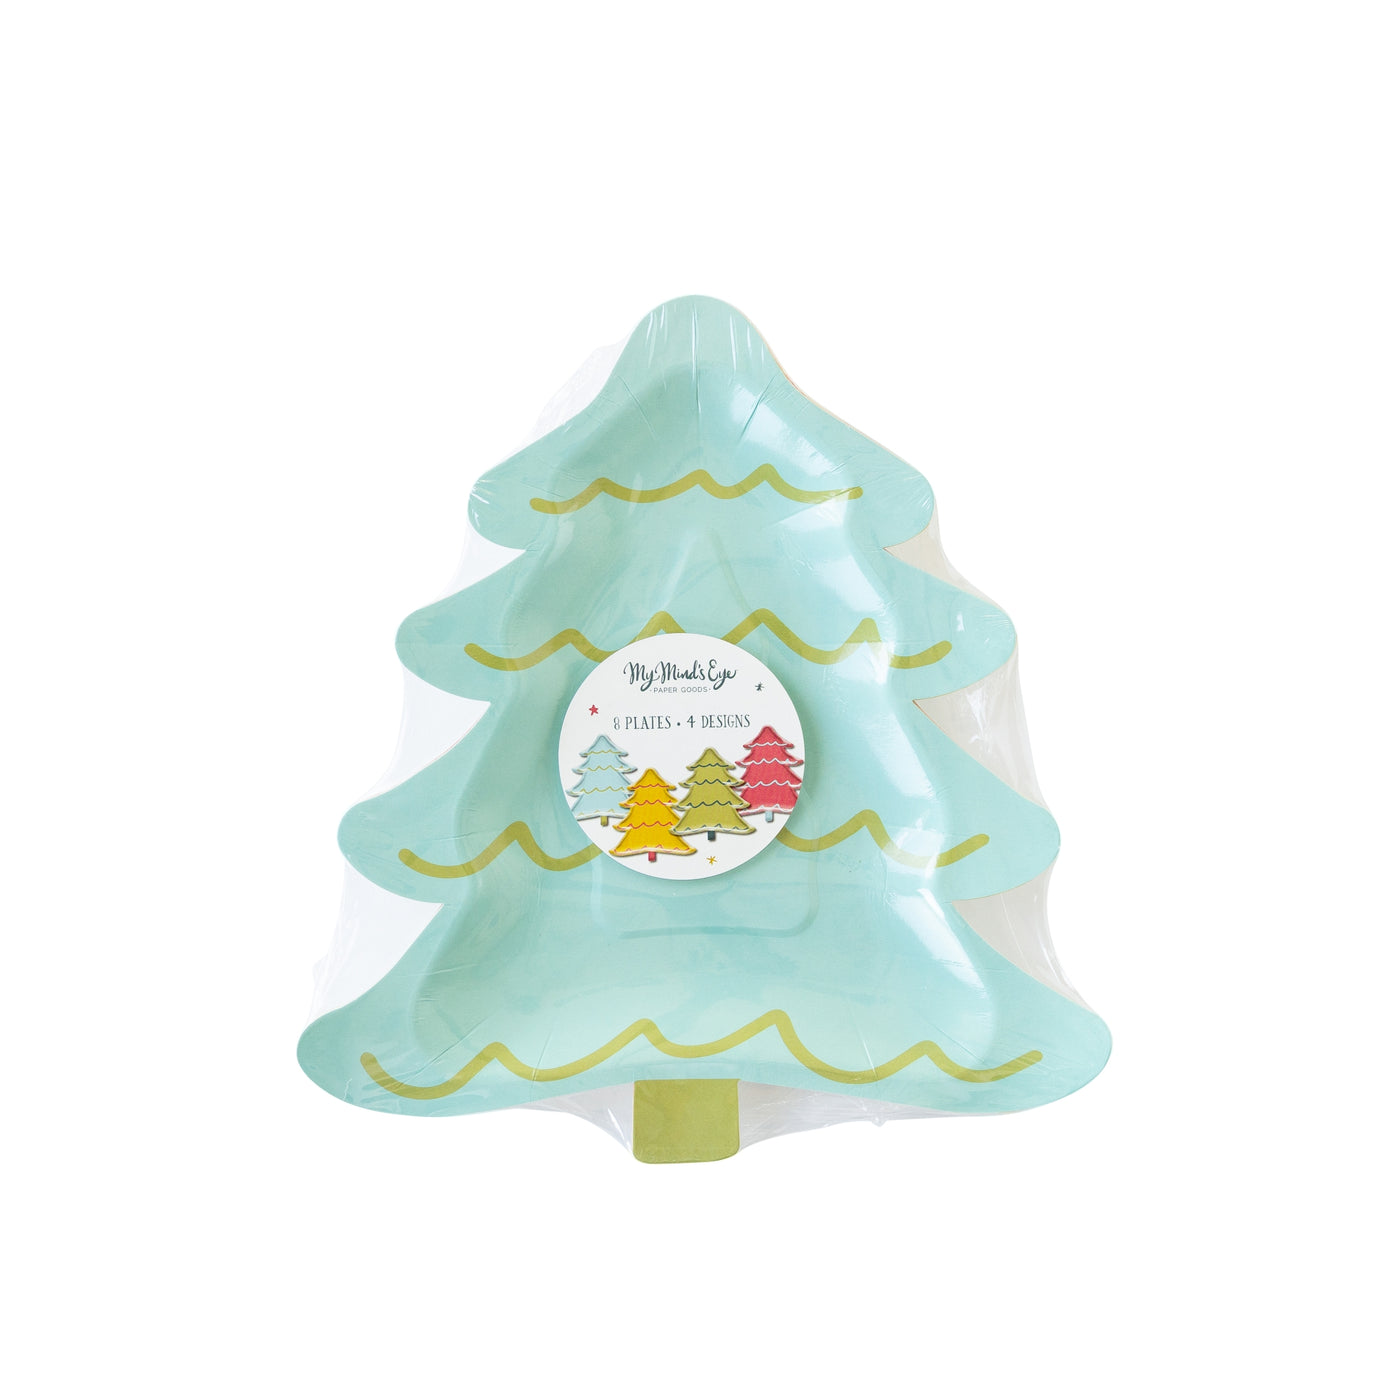 PRESALE SHIPPING MID OCTOBER - BRT1040 - Bright Holiday Tree Shaped Paper Plate Set